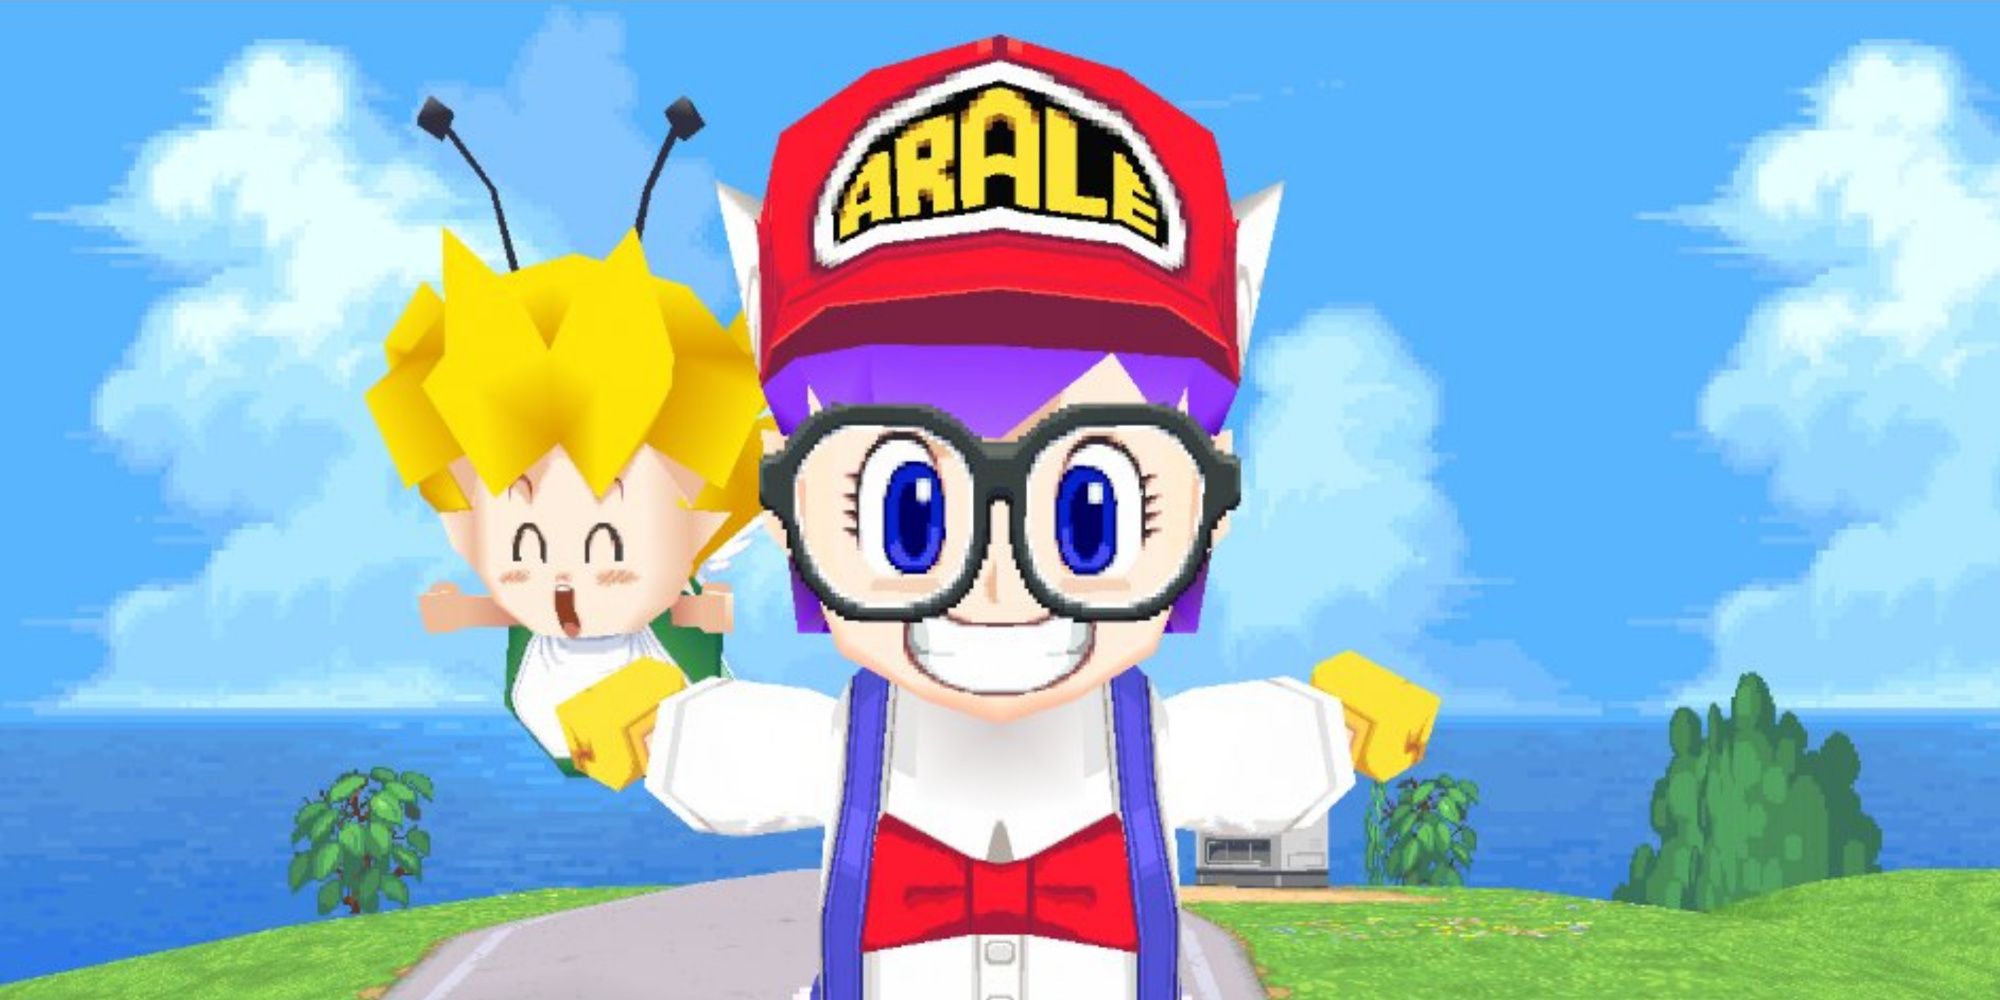 Gatchan and Arale in Dr. Slump